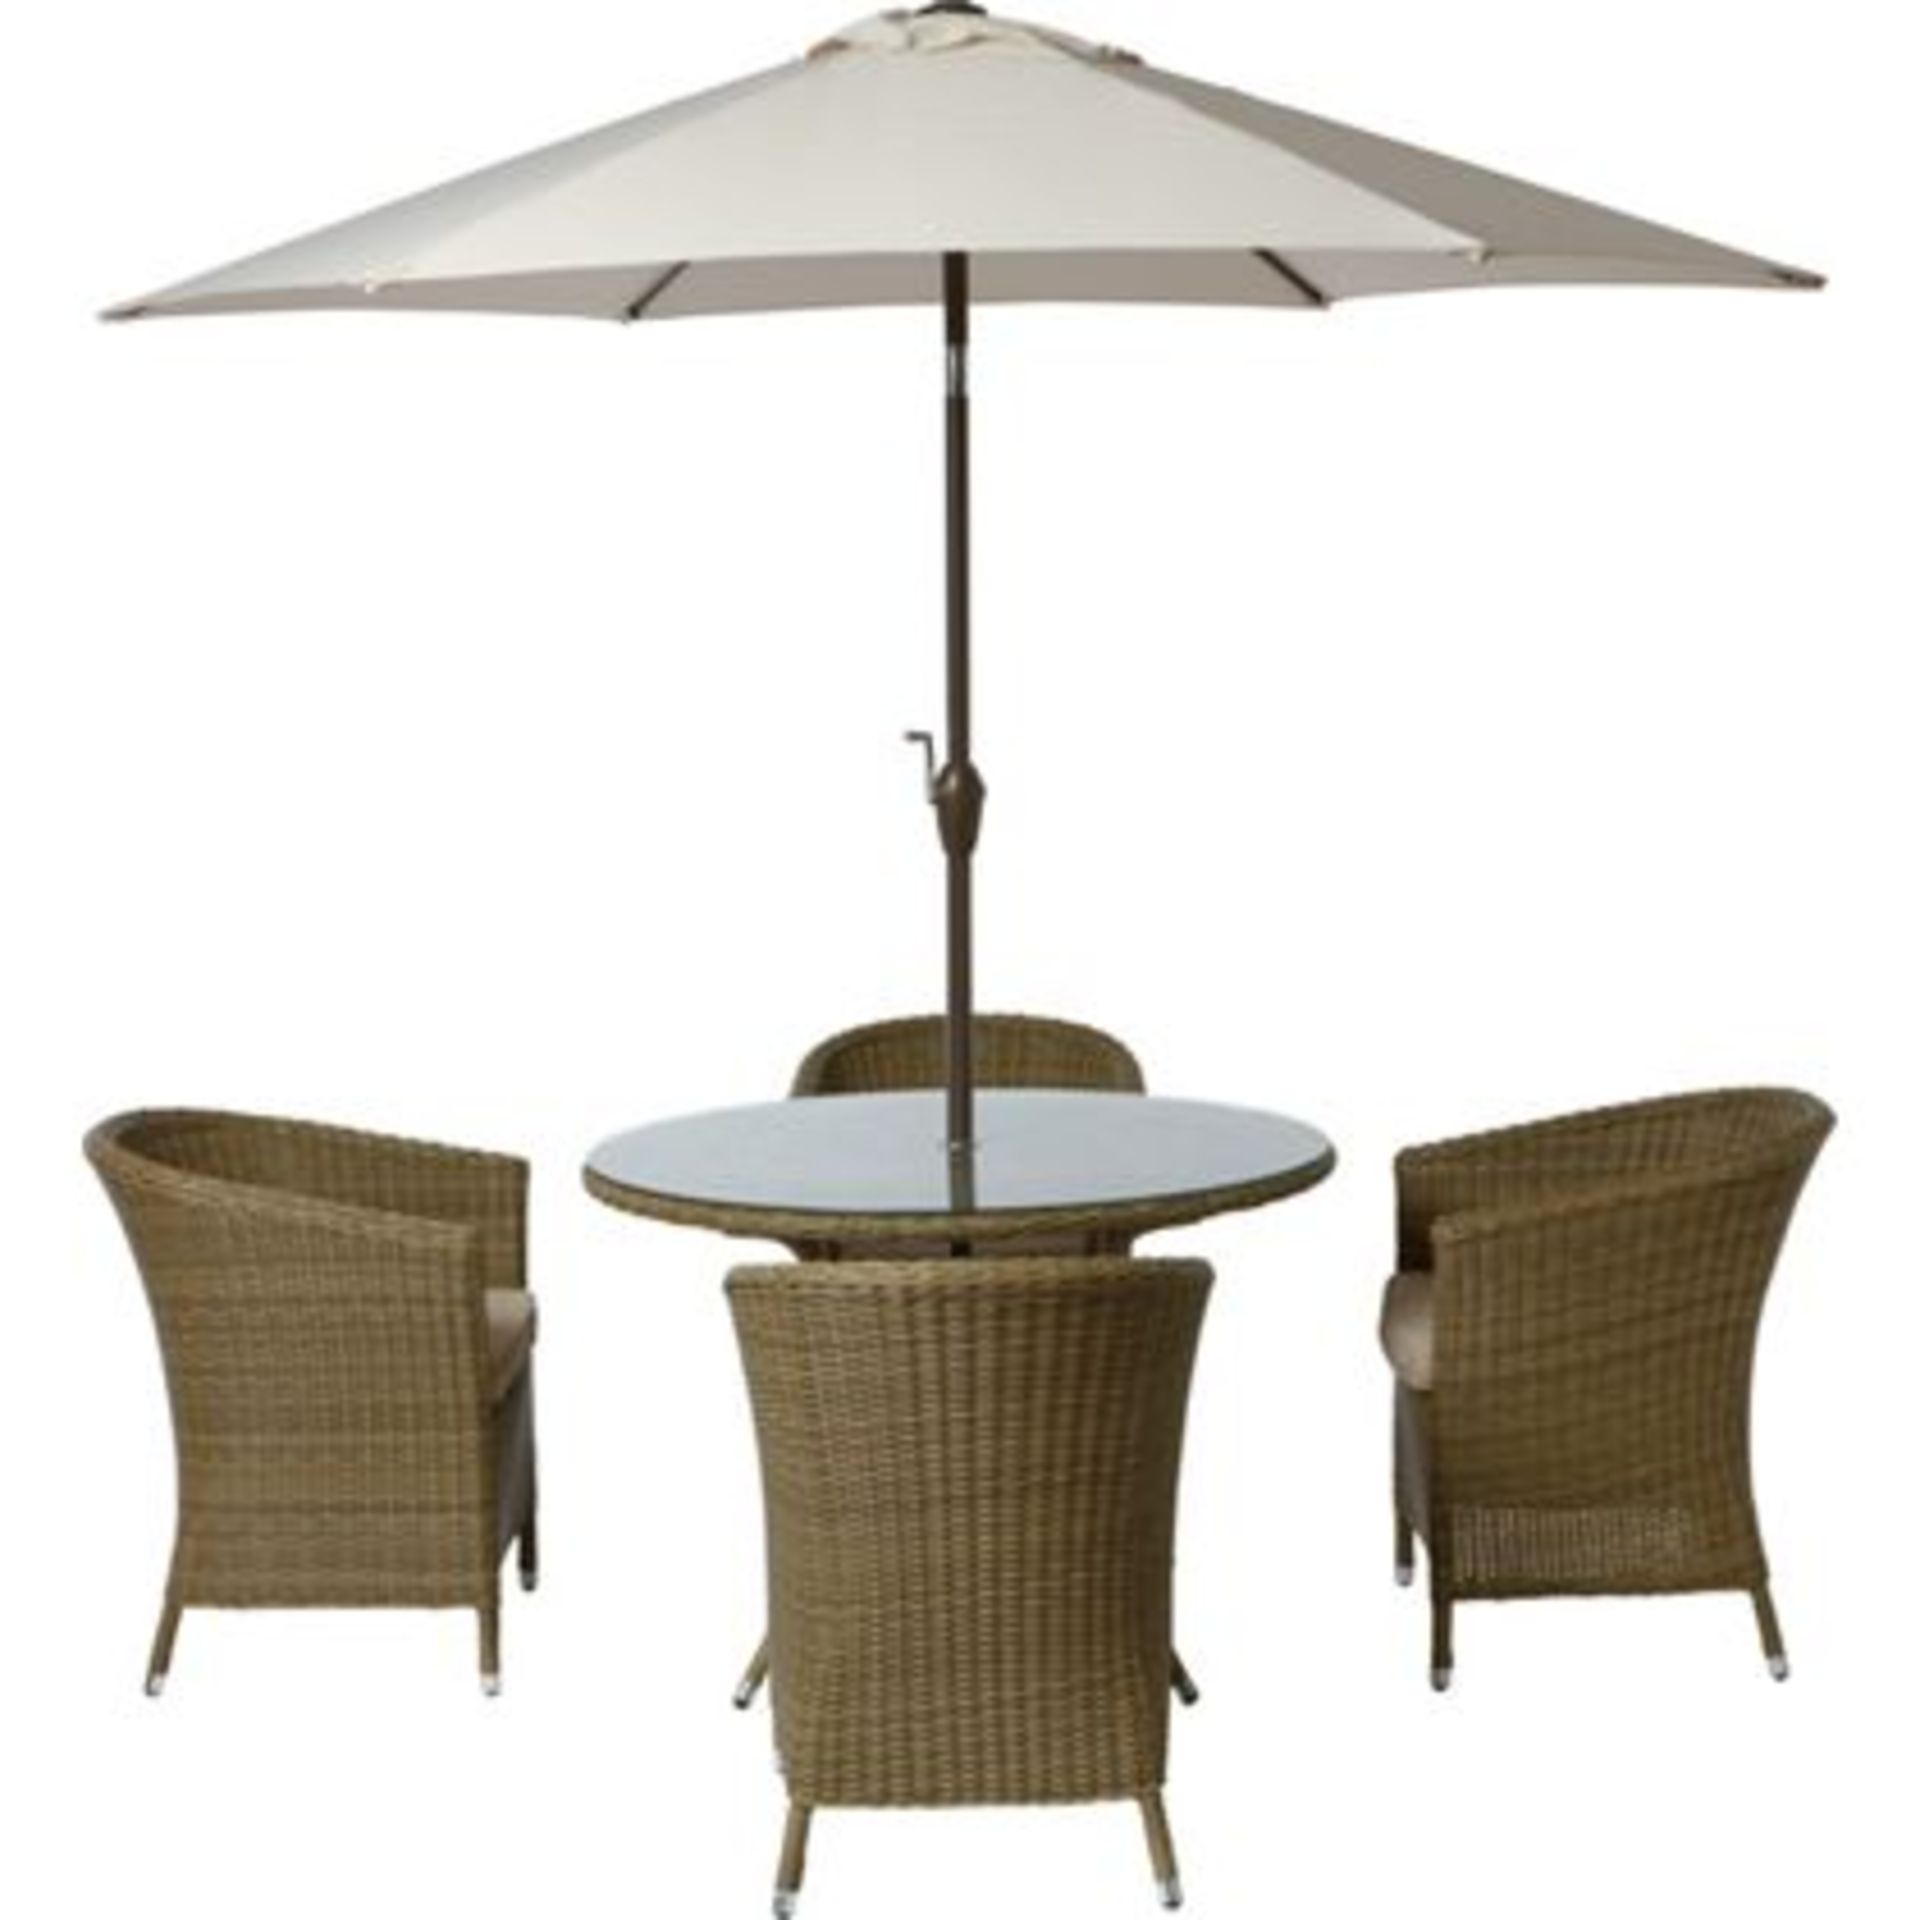 New Worcester 4 Seater Rattan Effect Garden Furniture Set. RRP £599.99. ade from hand woven